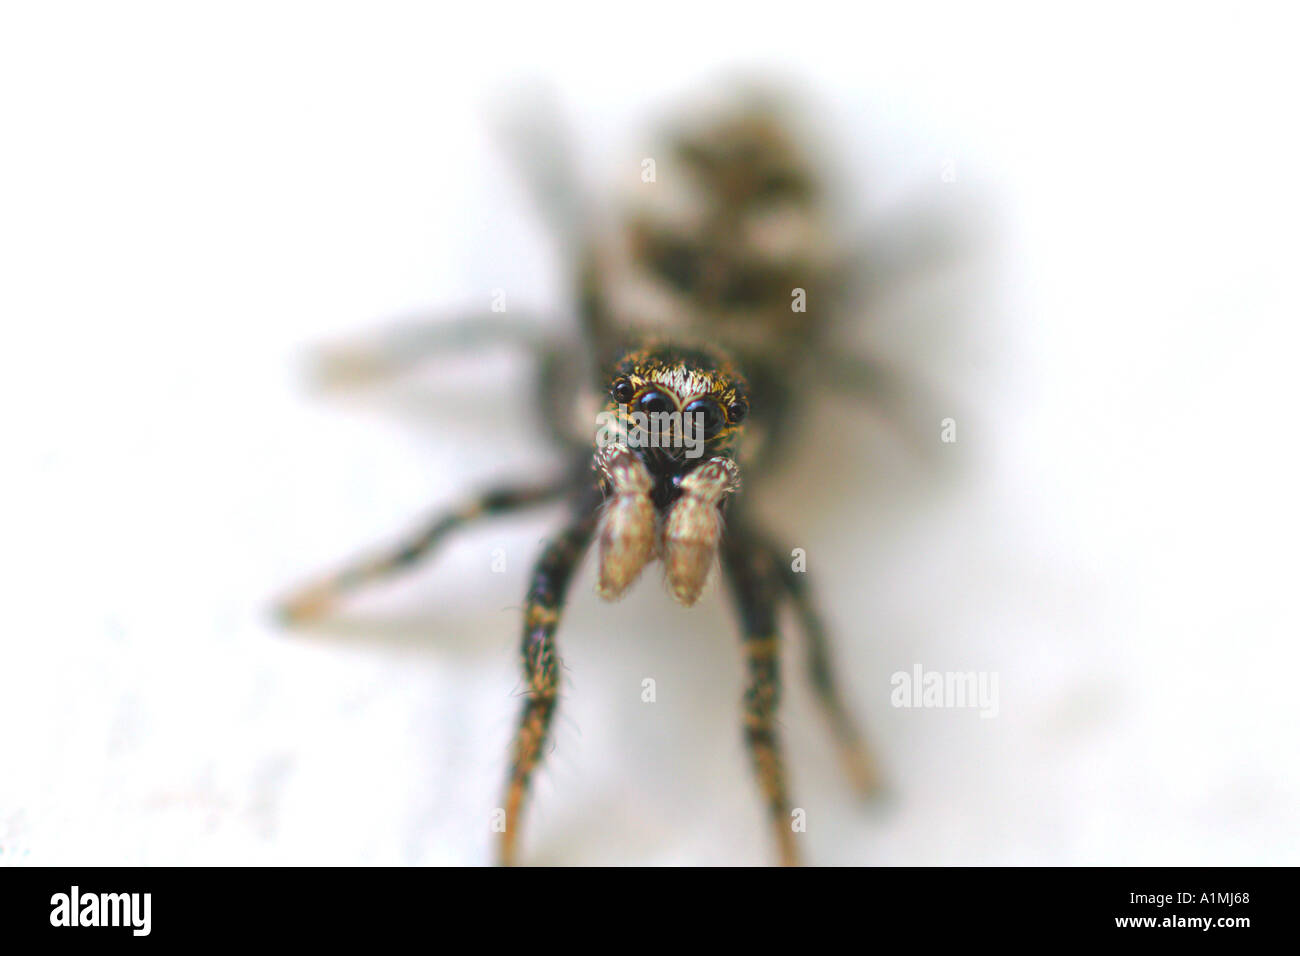 jumping spider looking at viewer Stock Photo